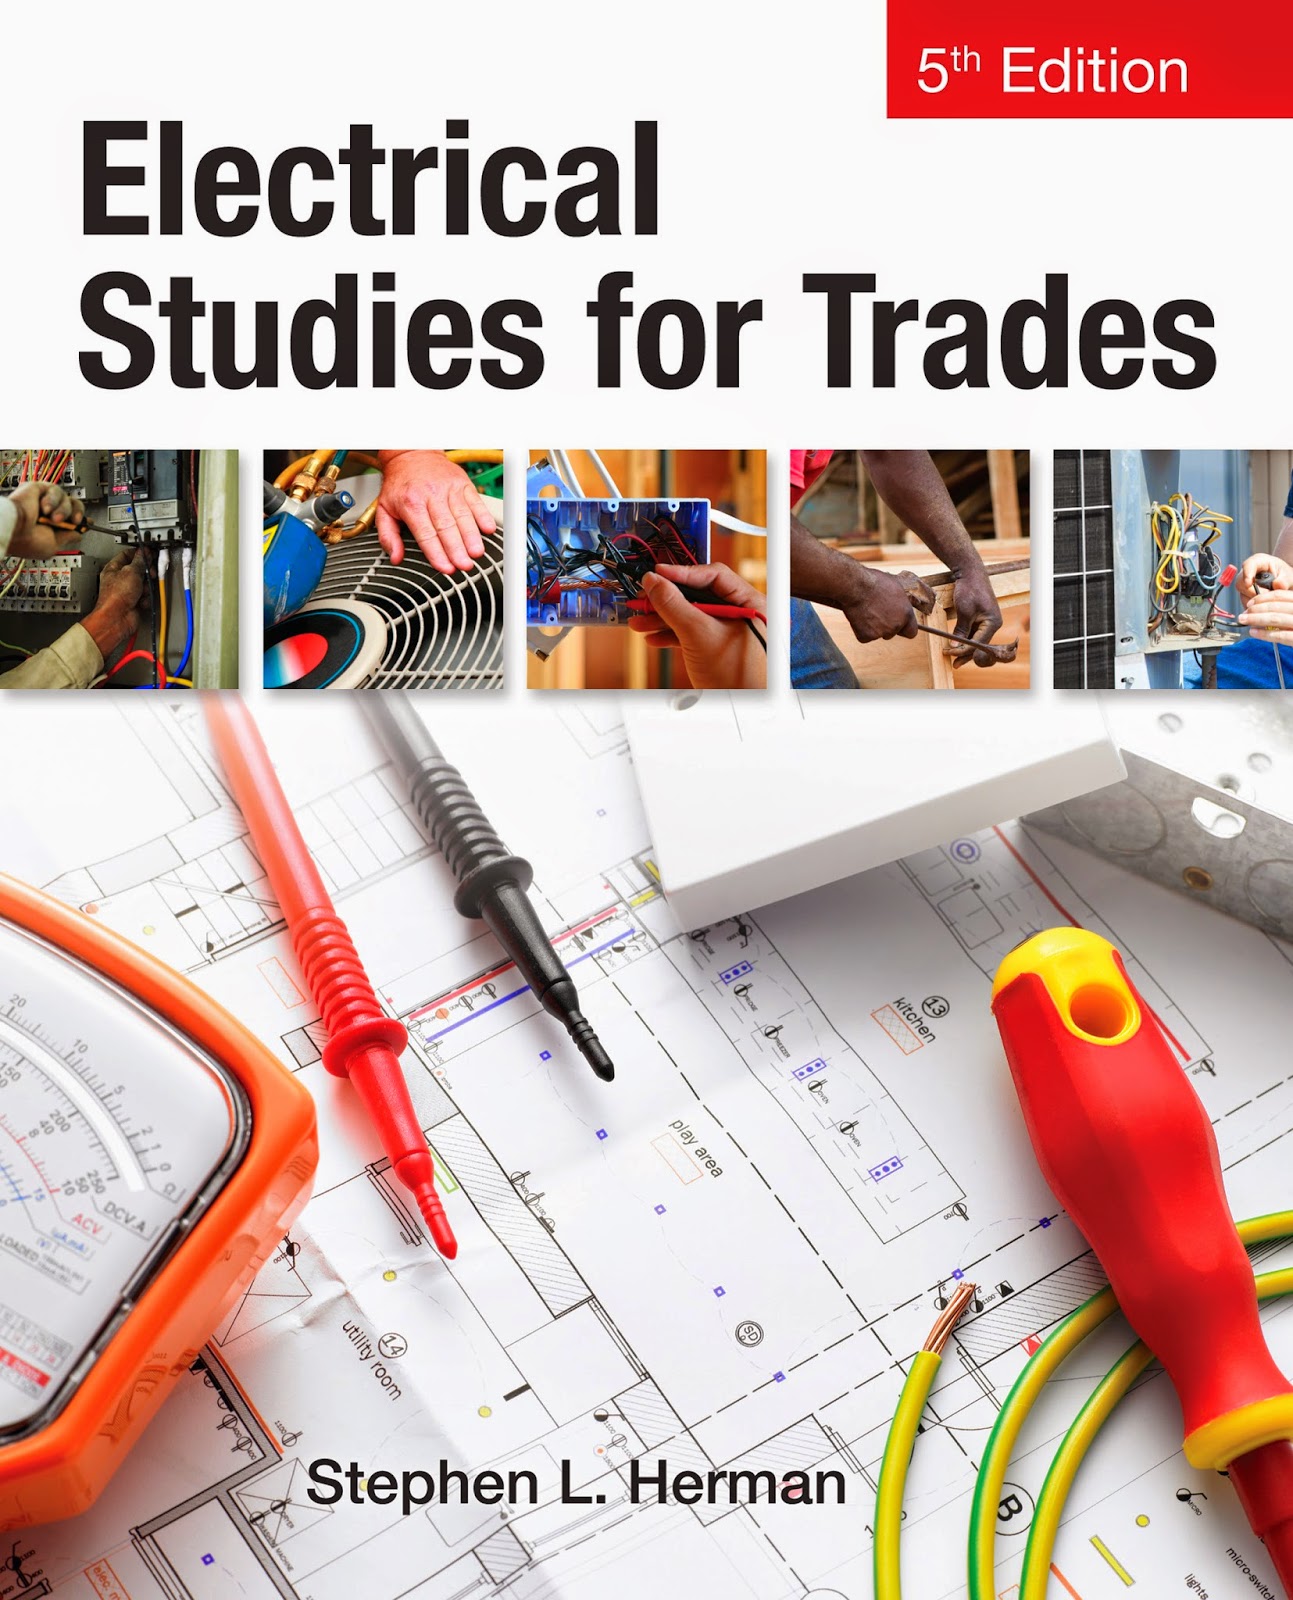 http://kingcheapebook.blogspot.com/2014/07/electrical-studies-for-trades.html